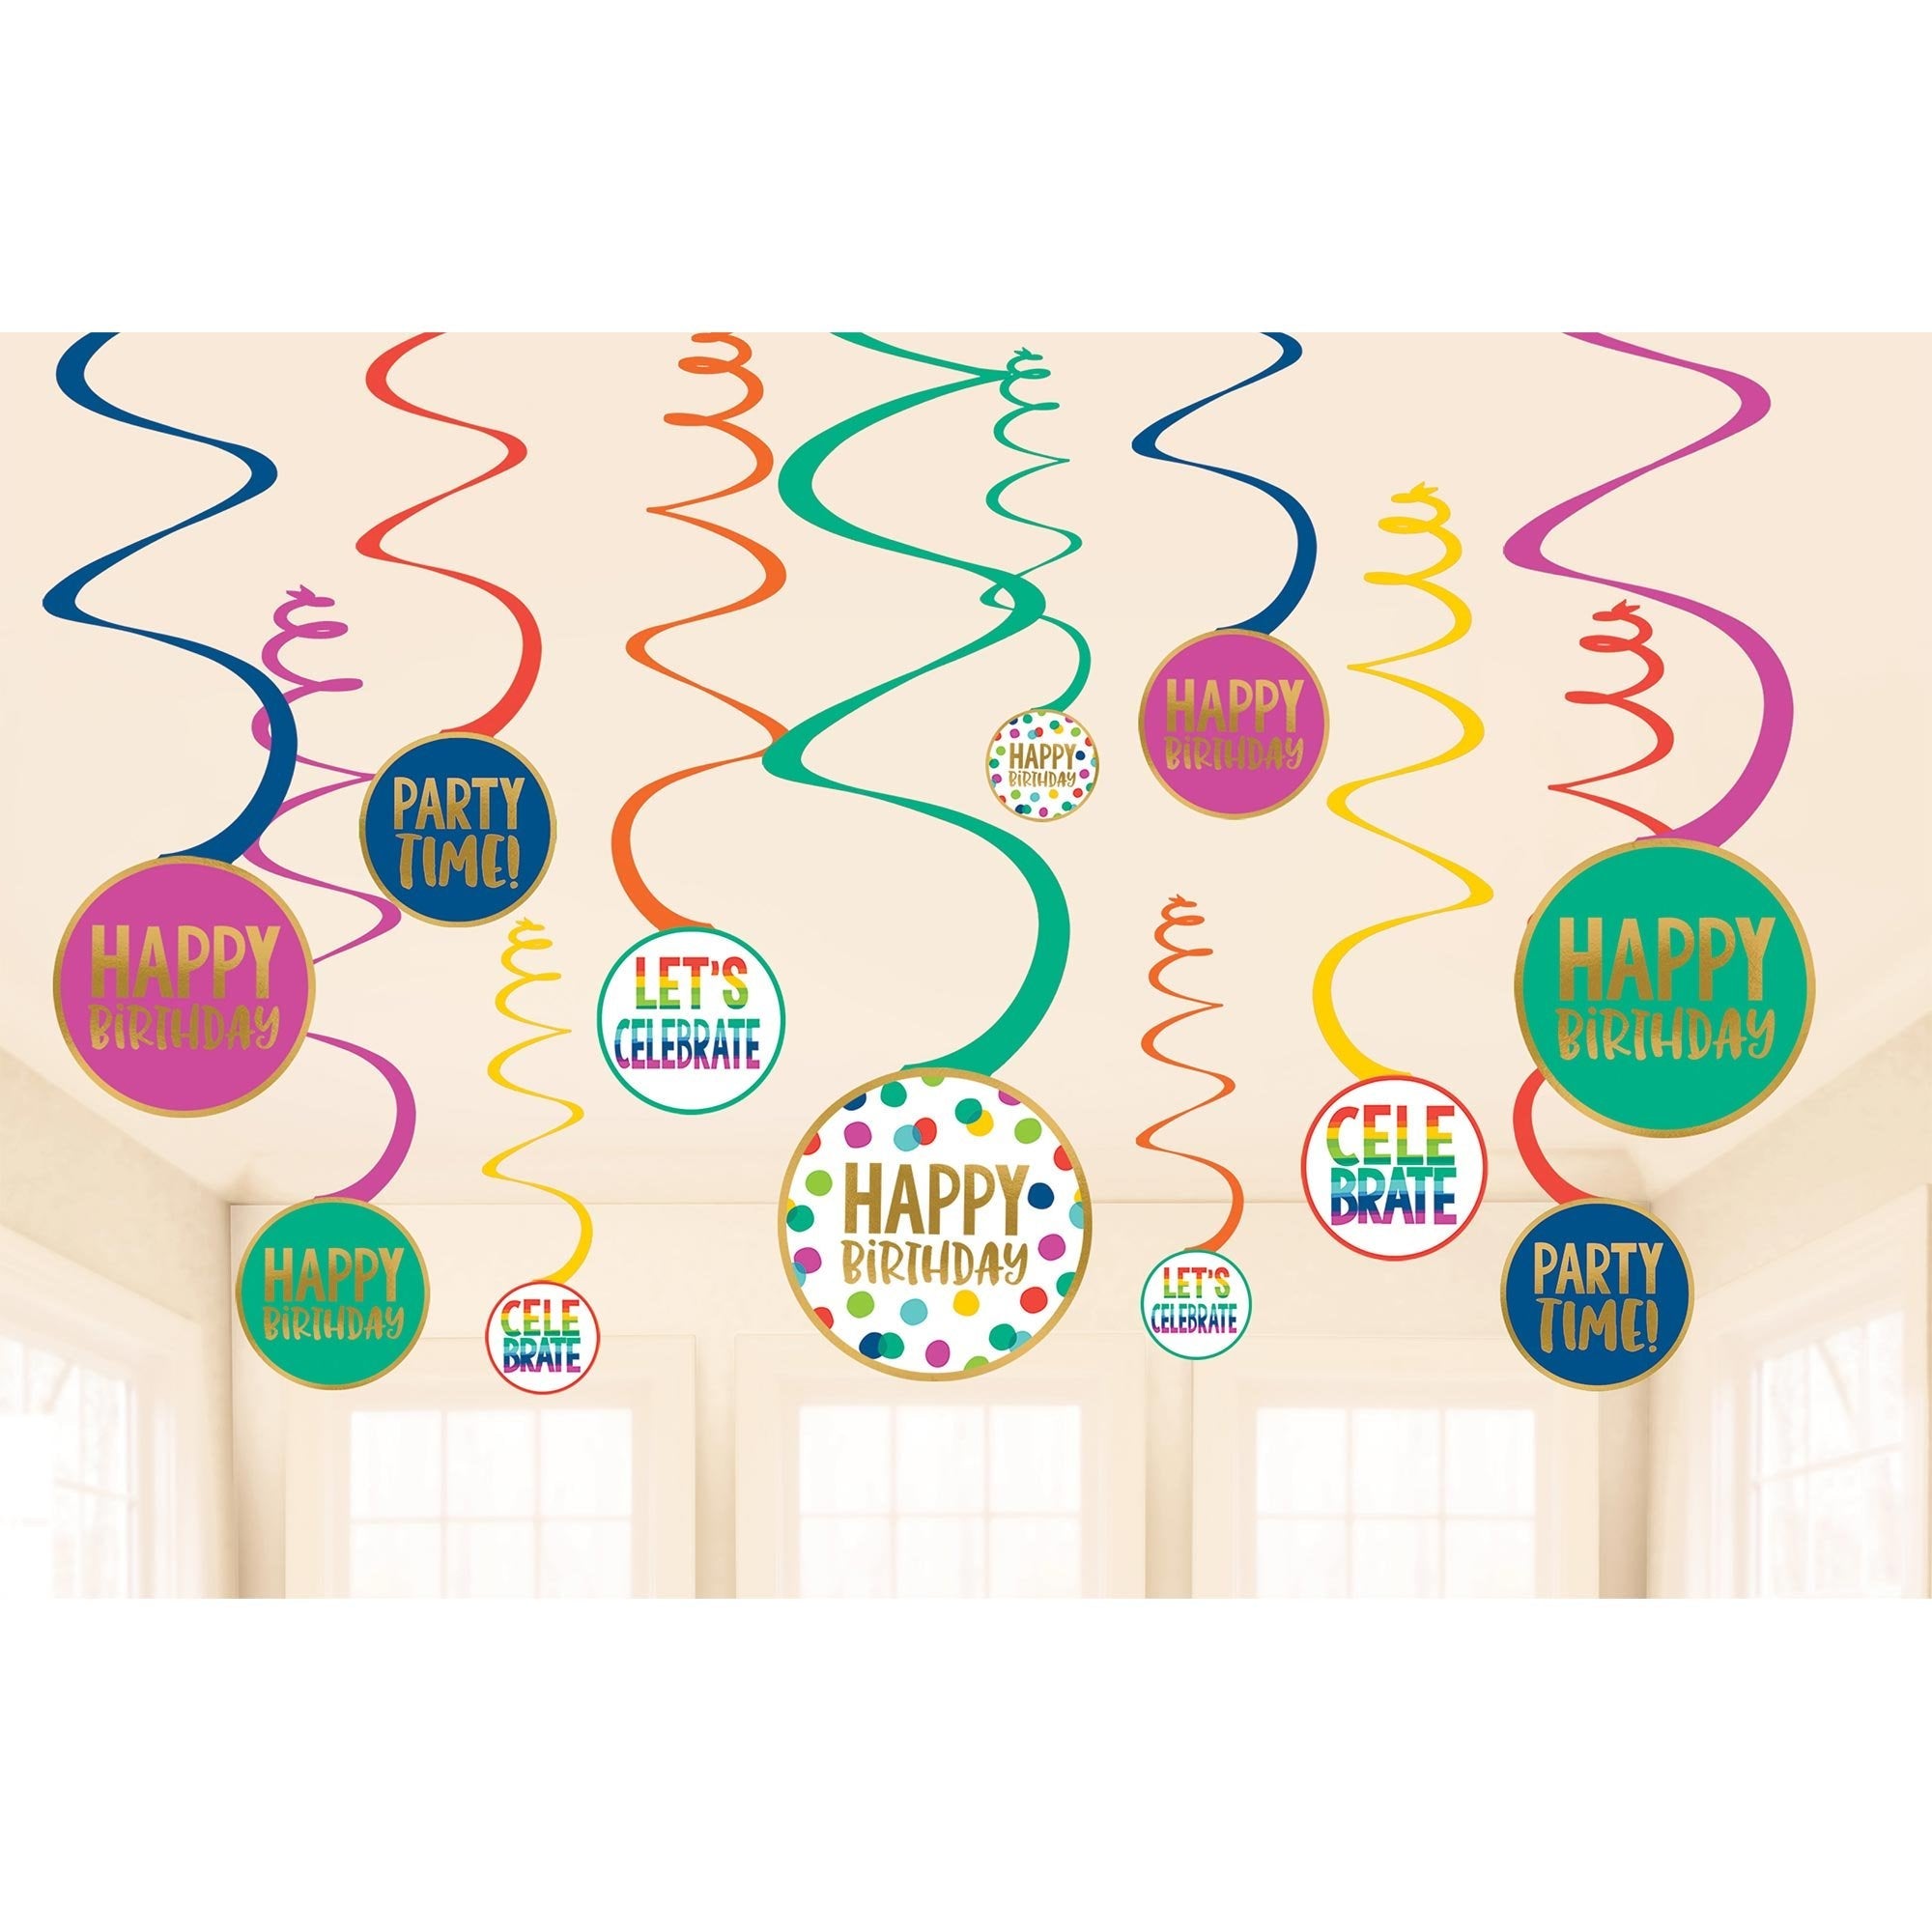 Party Empress' Happy Dots & Rainbow Wishes Birthday Decor creates a captivating and festive ambiance for a birthday celebration.